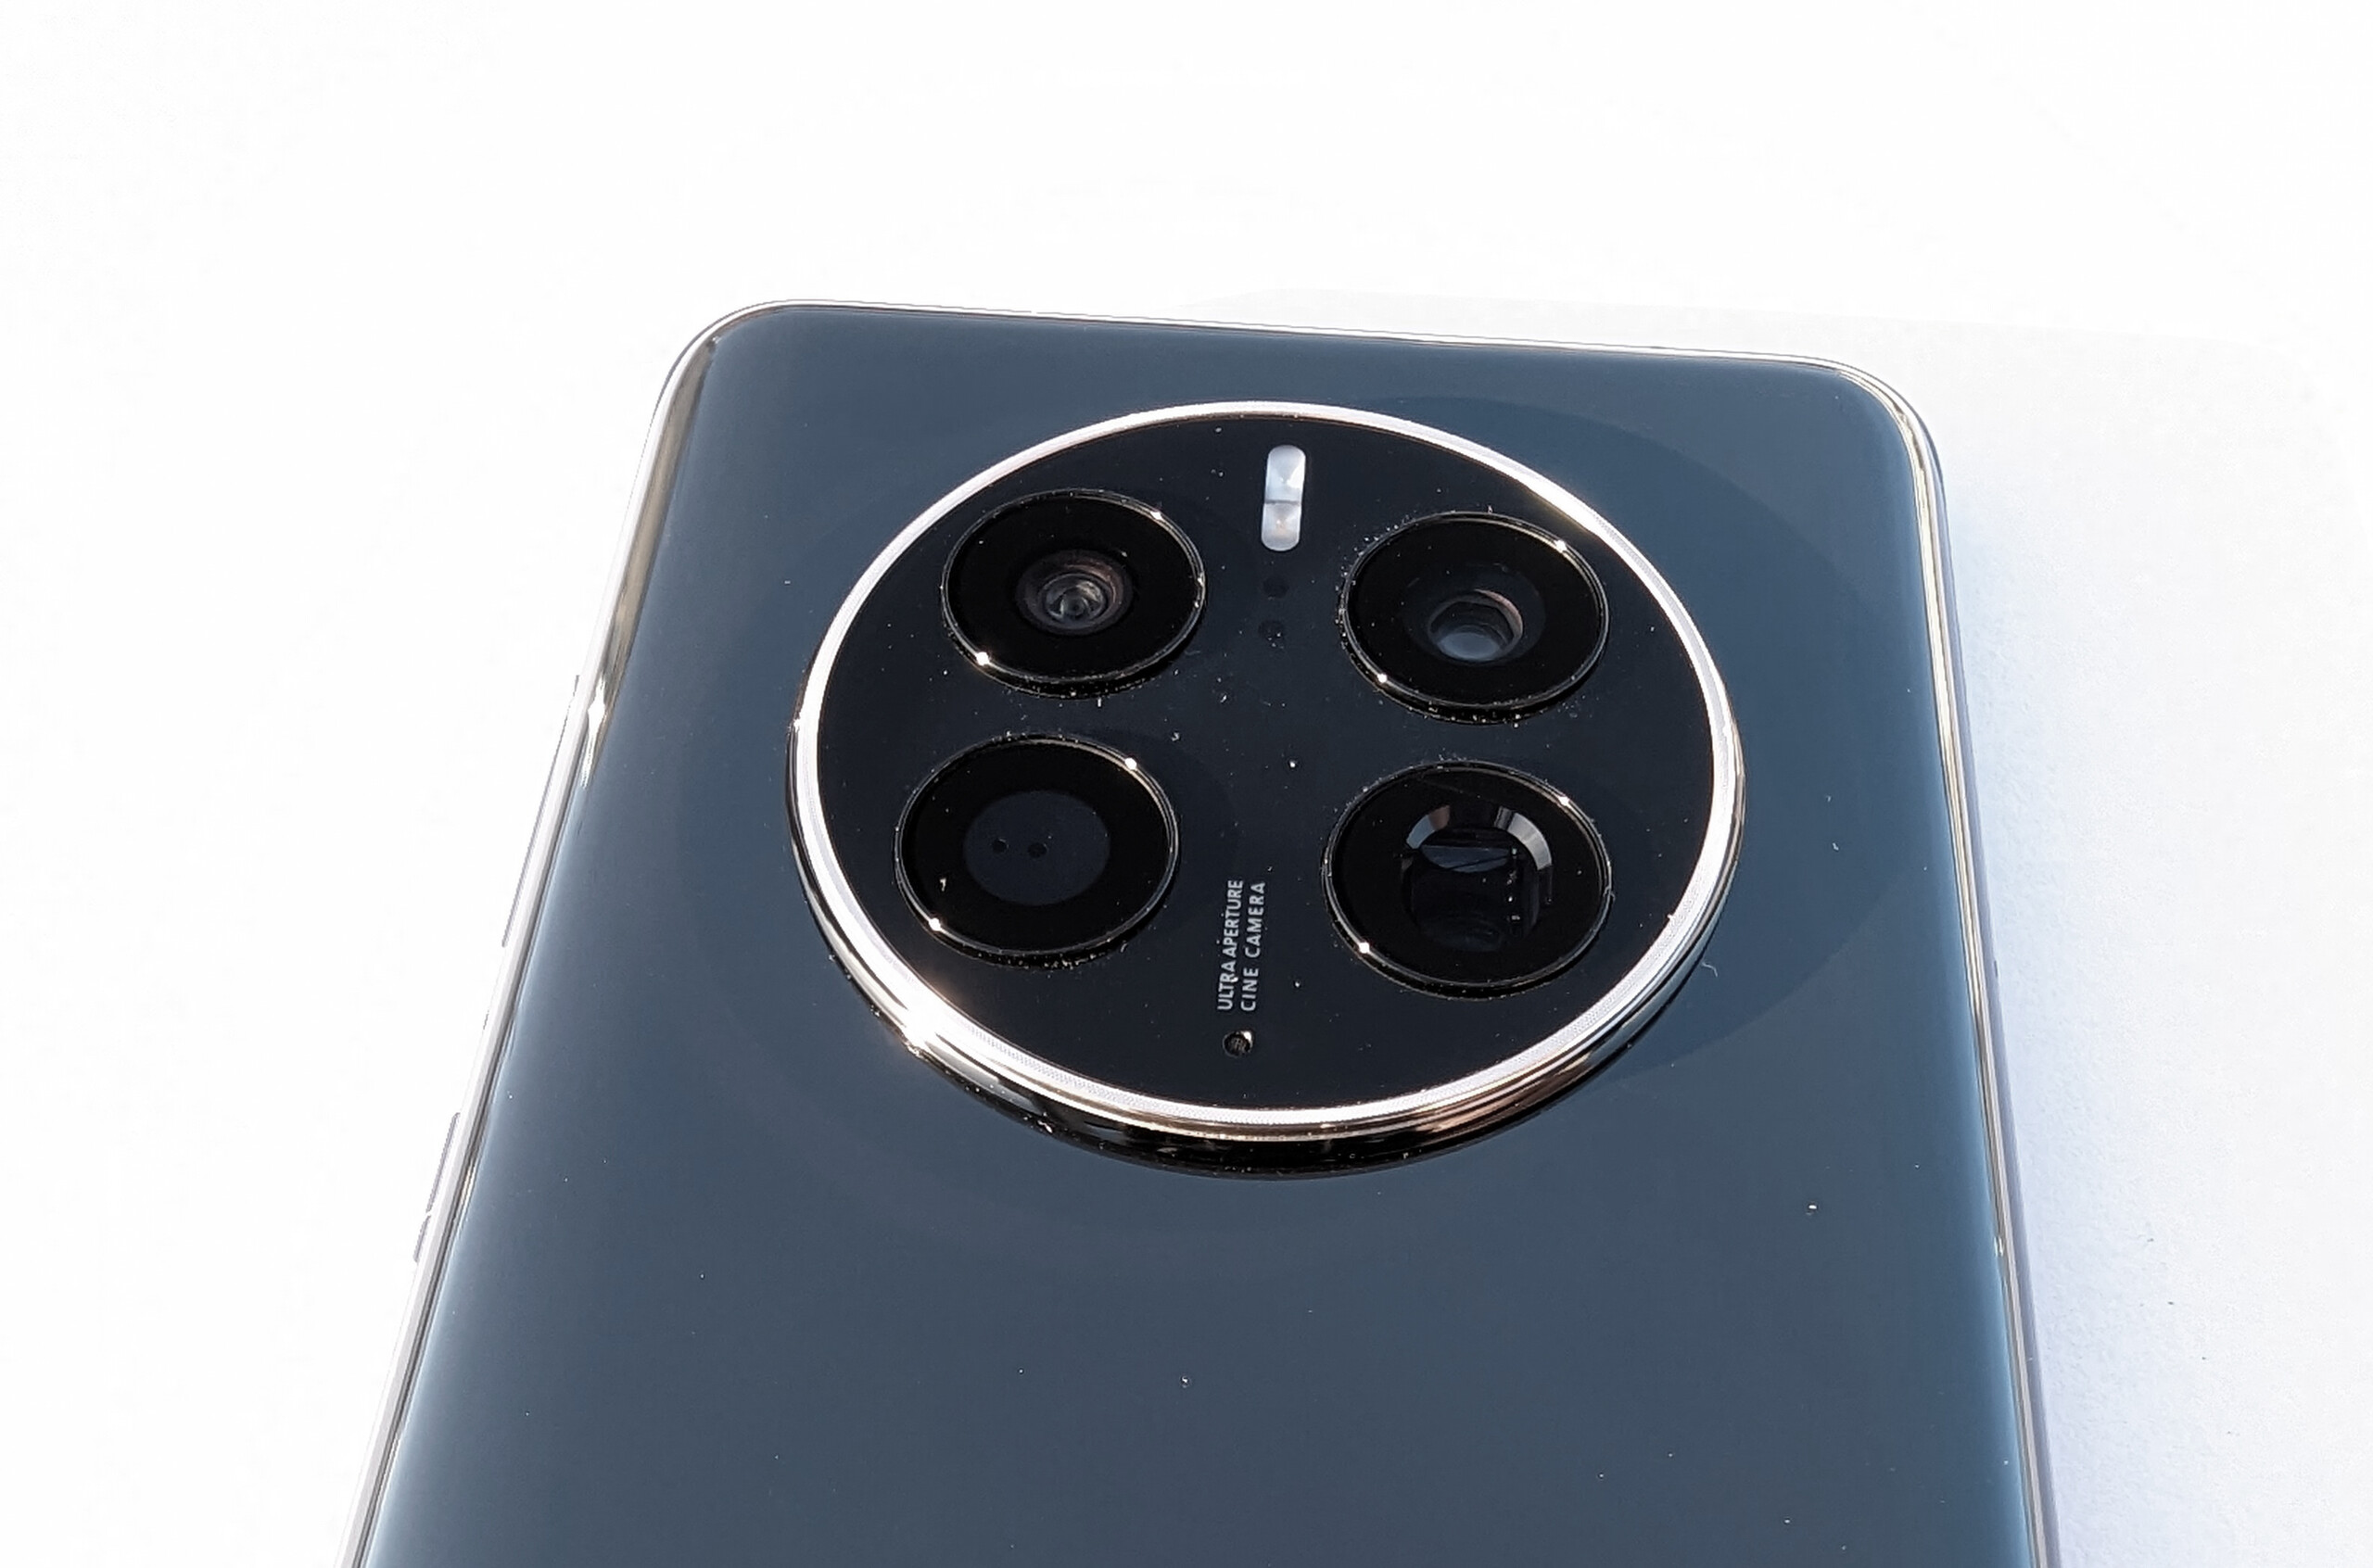 Huawei Mate 50 Pro smartphone review: The camera star has problems -   Reviews